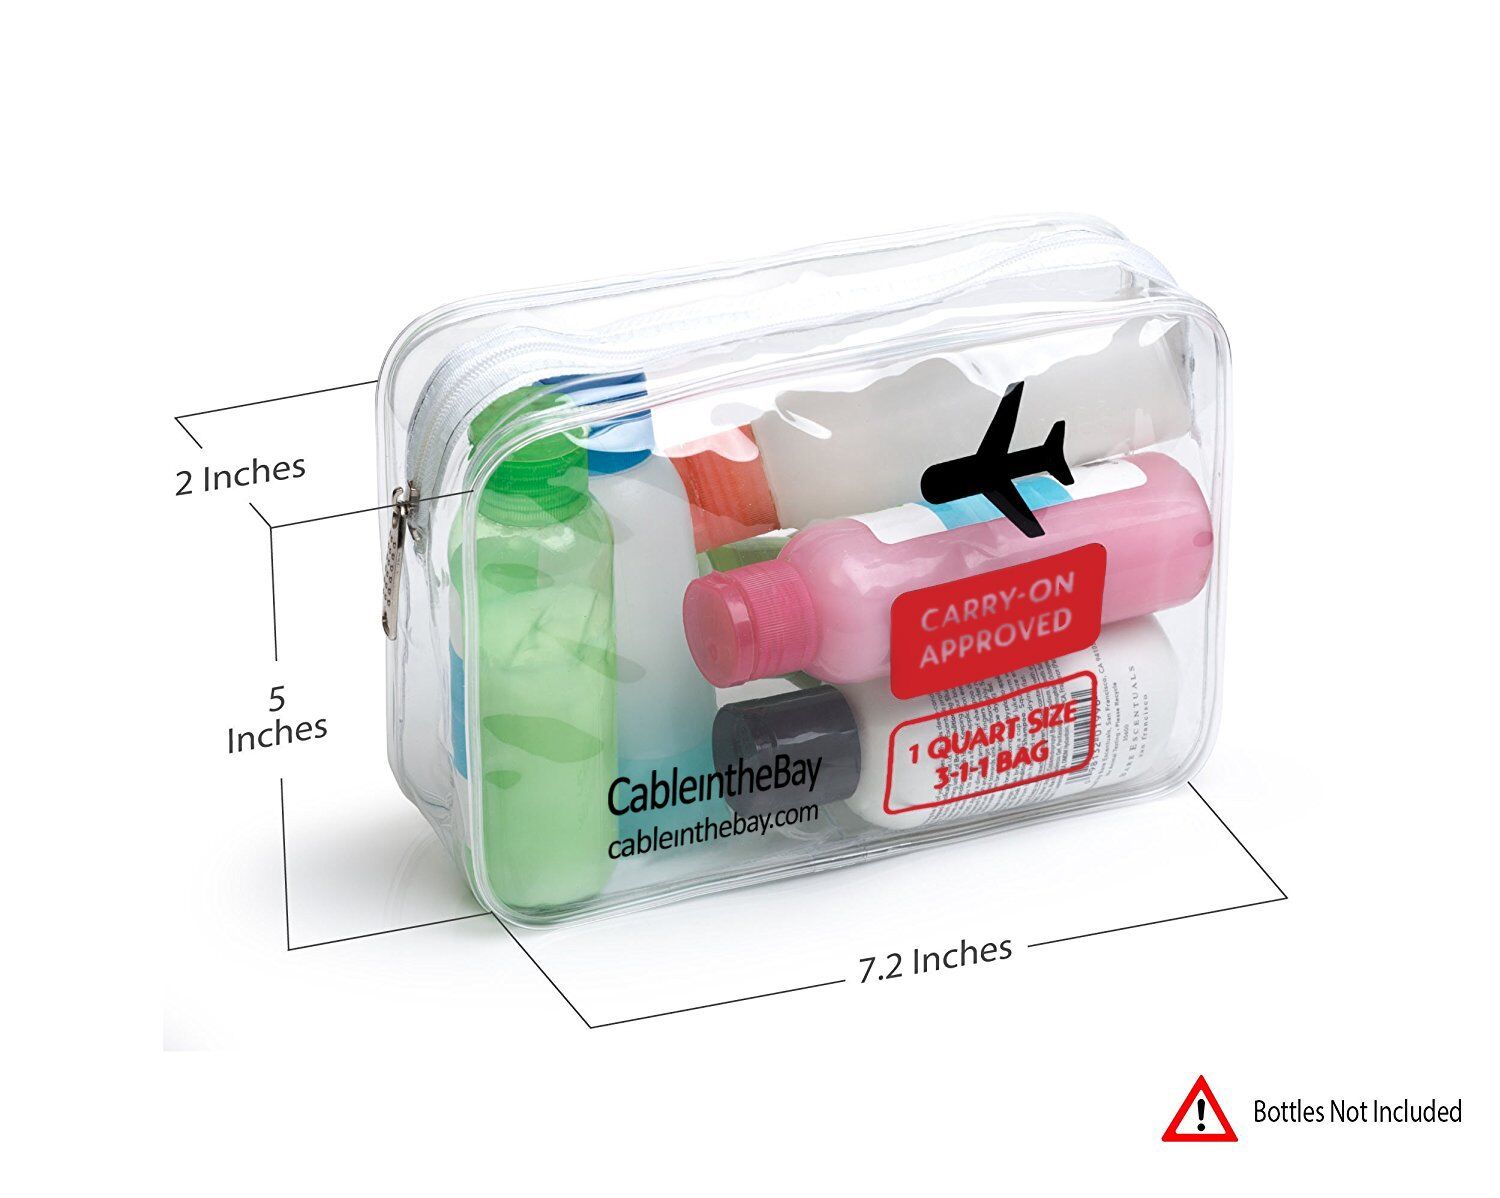 The TSA Approved Quart Size Bag Dimensions: Exactly How Big Can Your  Toiletry Liquids Bag Be?